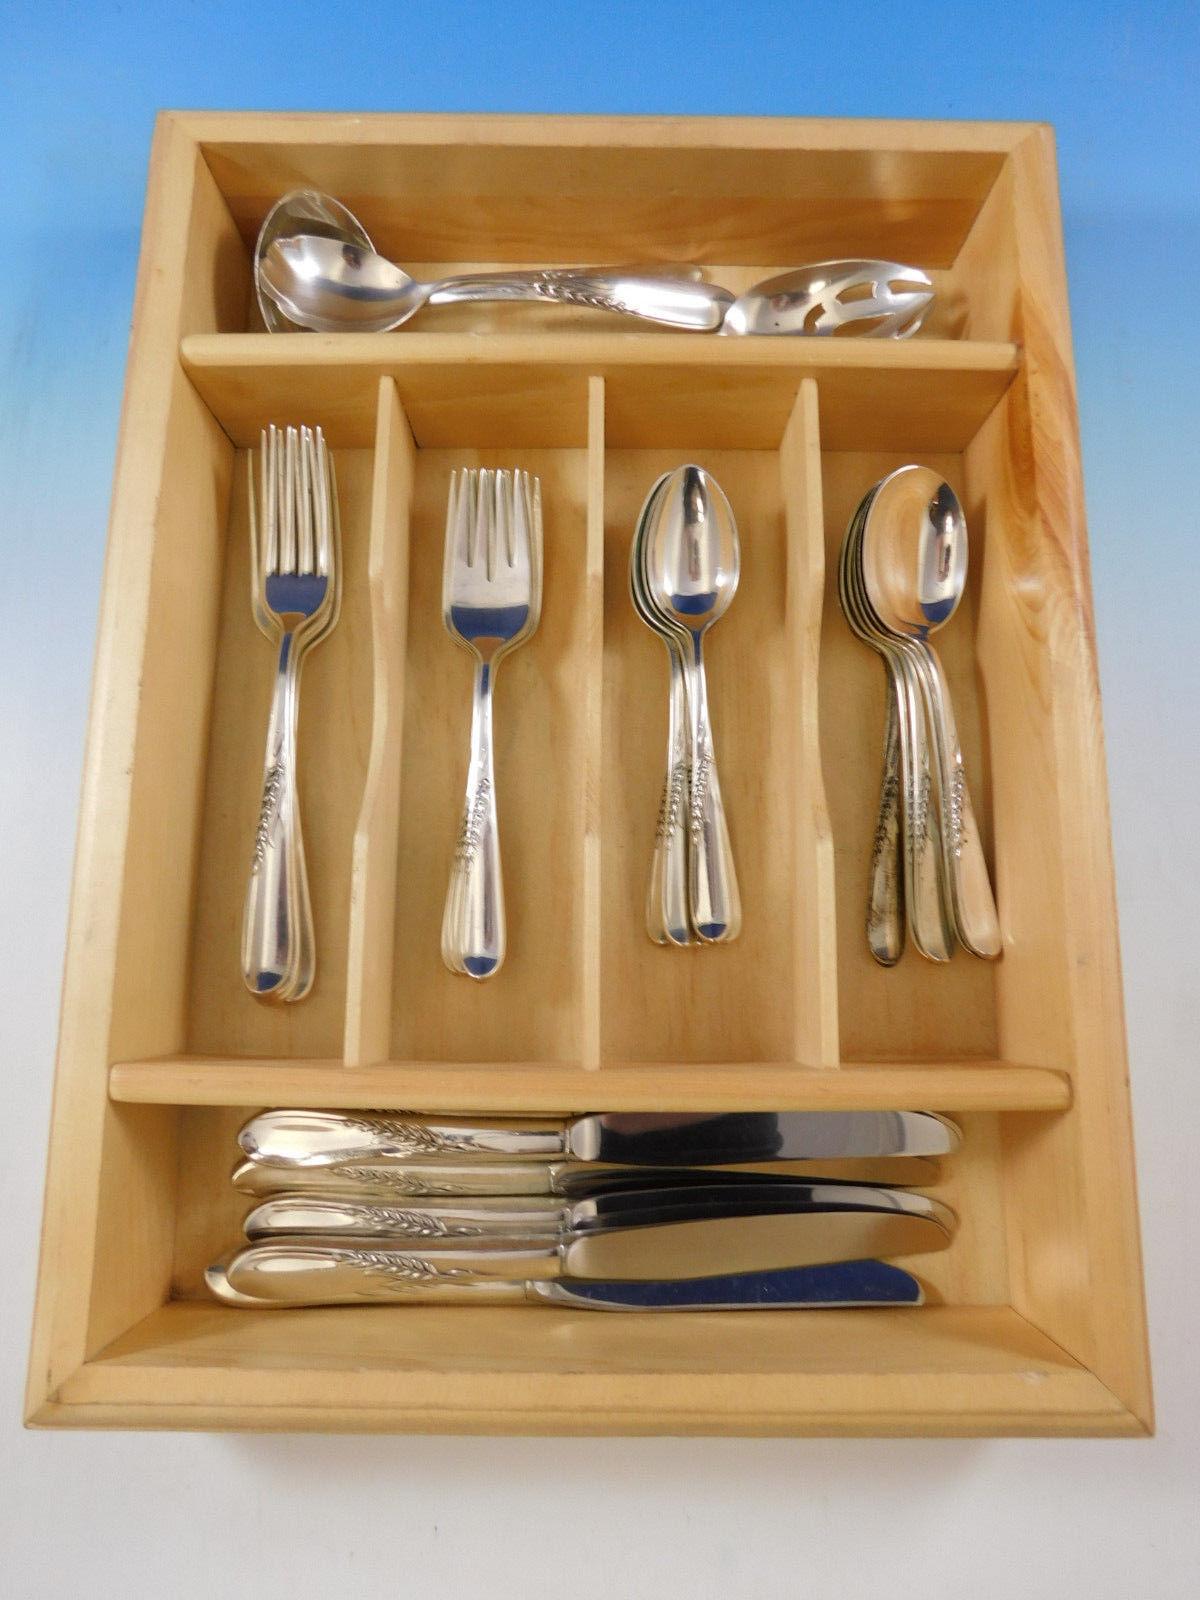 Silver wheat by Reed & Barton sterling silver flatware set, 33 pieces. Great starter set! This set includes:

6 knives, 8 3/4